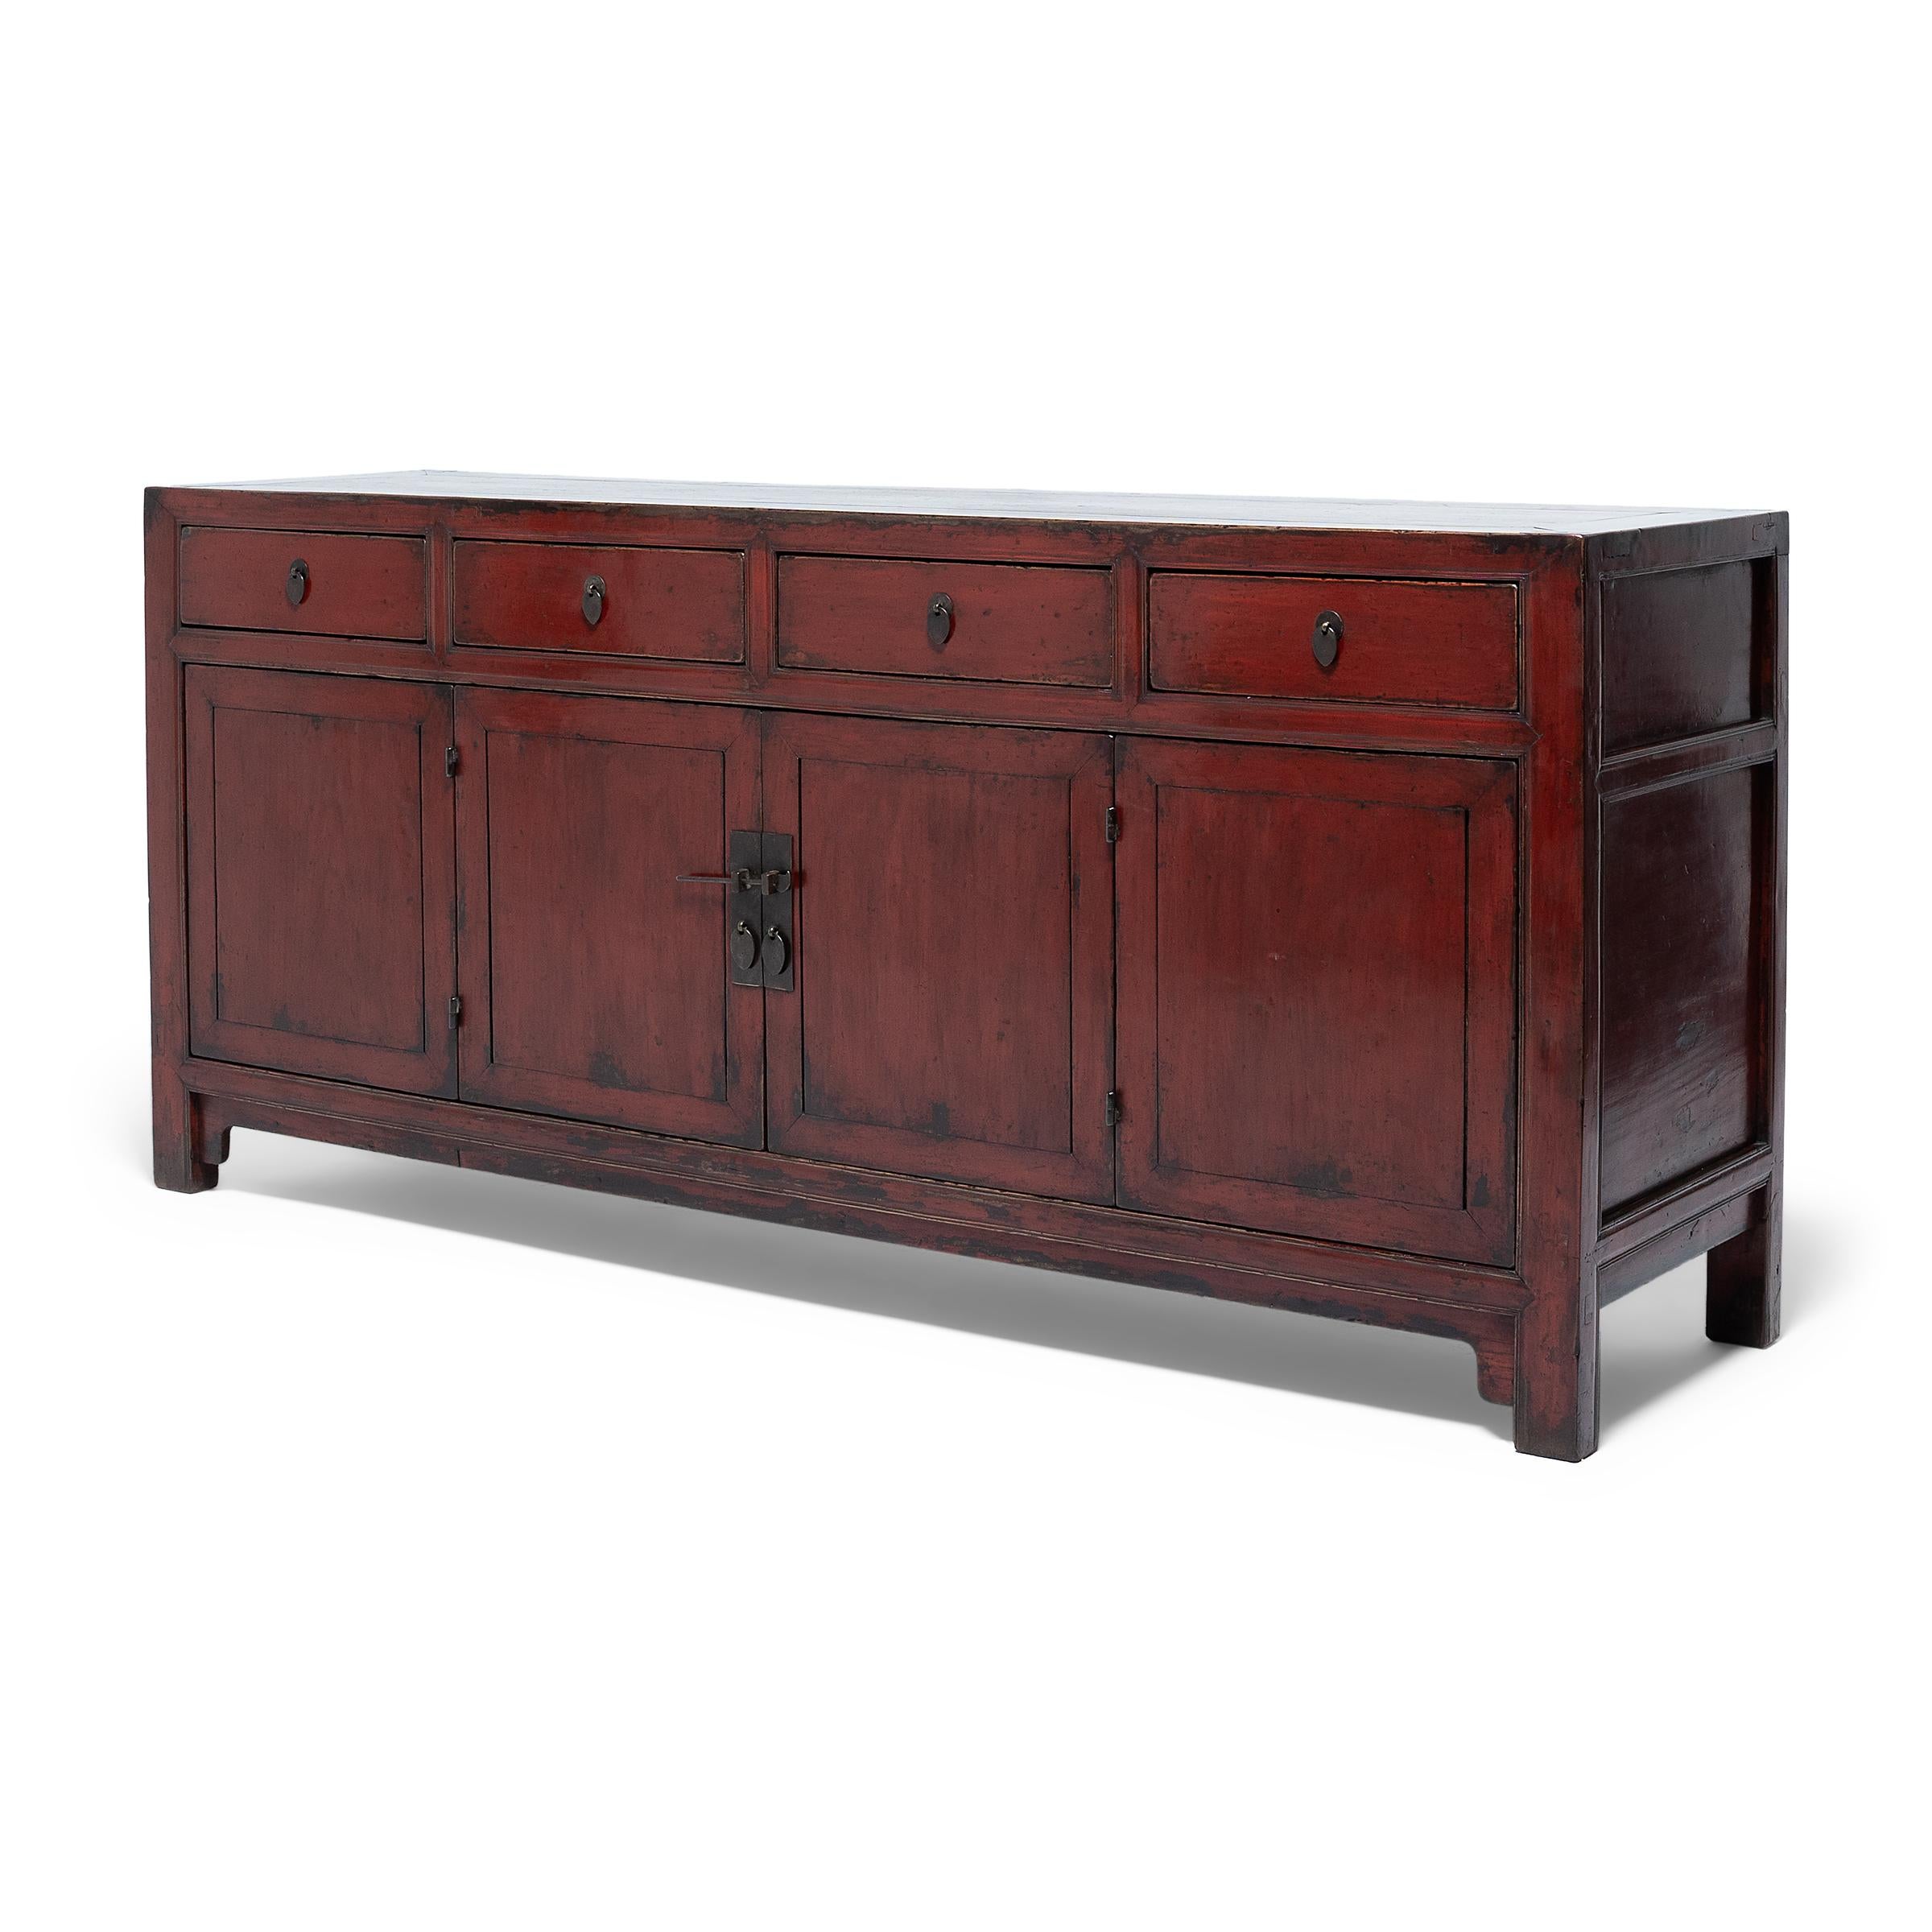 This Provincial coffer from northern China has a simple, clean-lined form finished with layers of black and cinnabar-red lacquer. The coffer dates to the early 19th Century and is expertly crafted of northern elm (yumu) using traditional